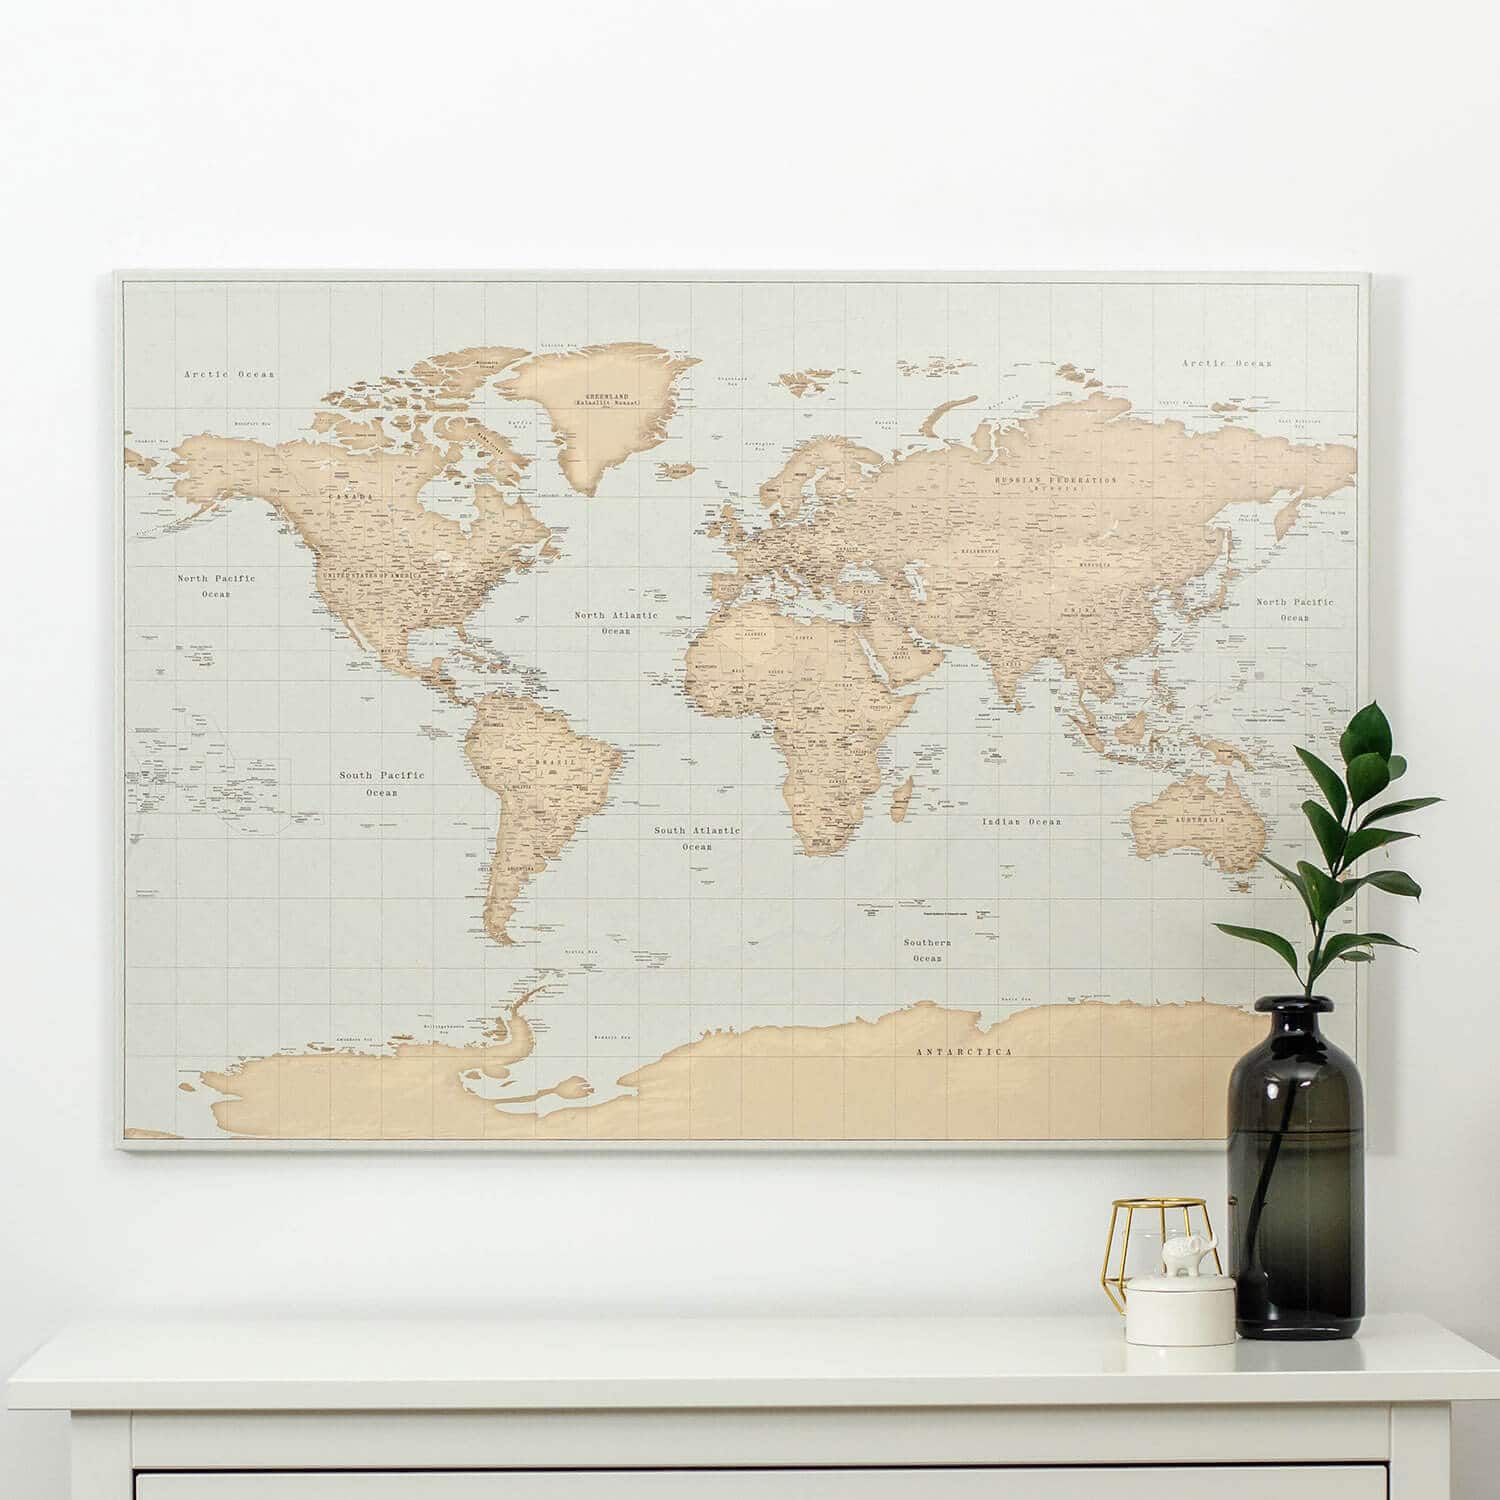 Photo & Art Print Map of Europe with capitals - Vintage texture